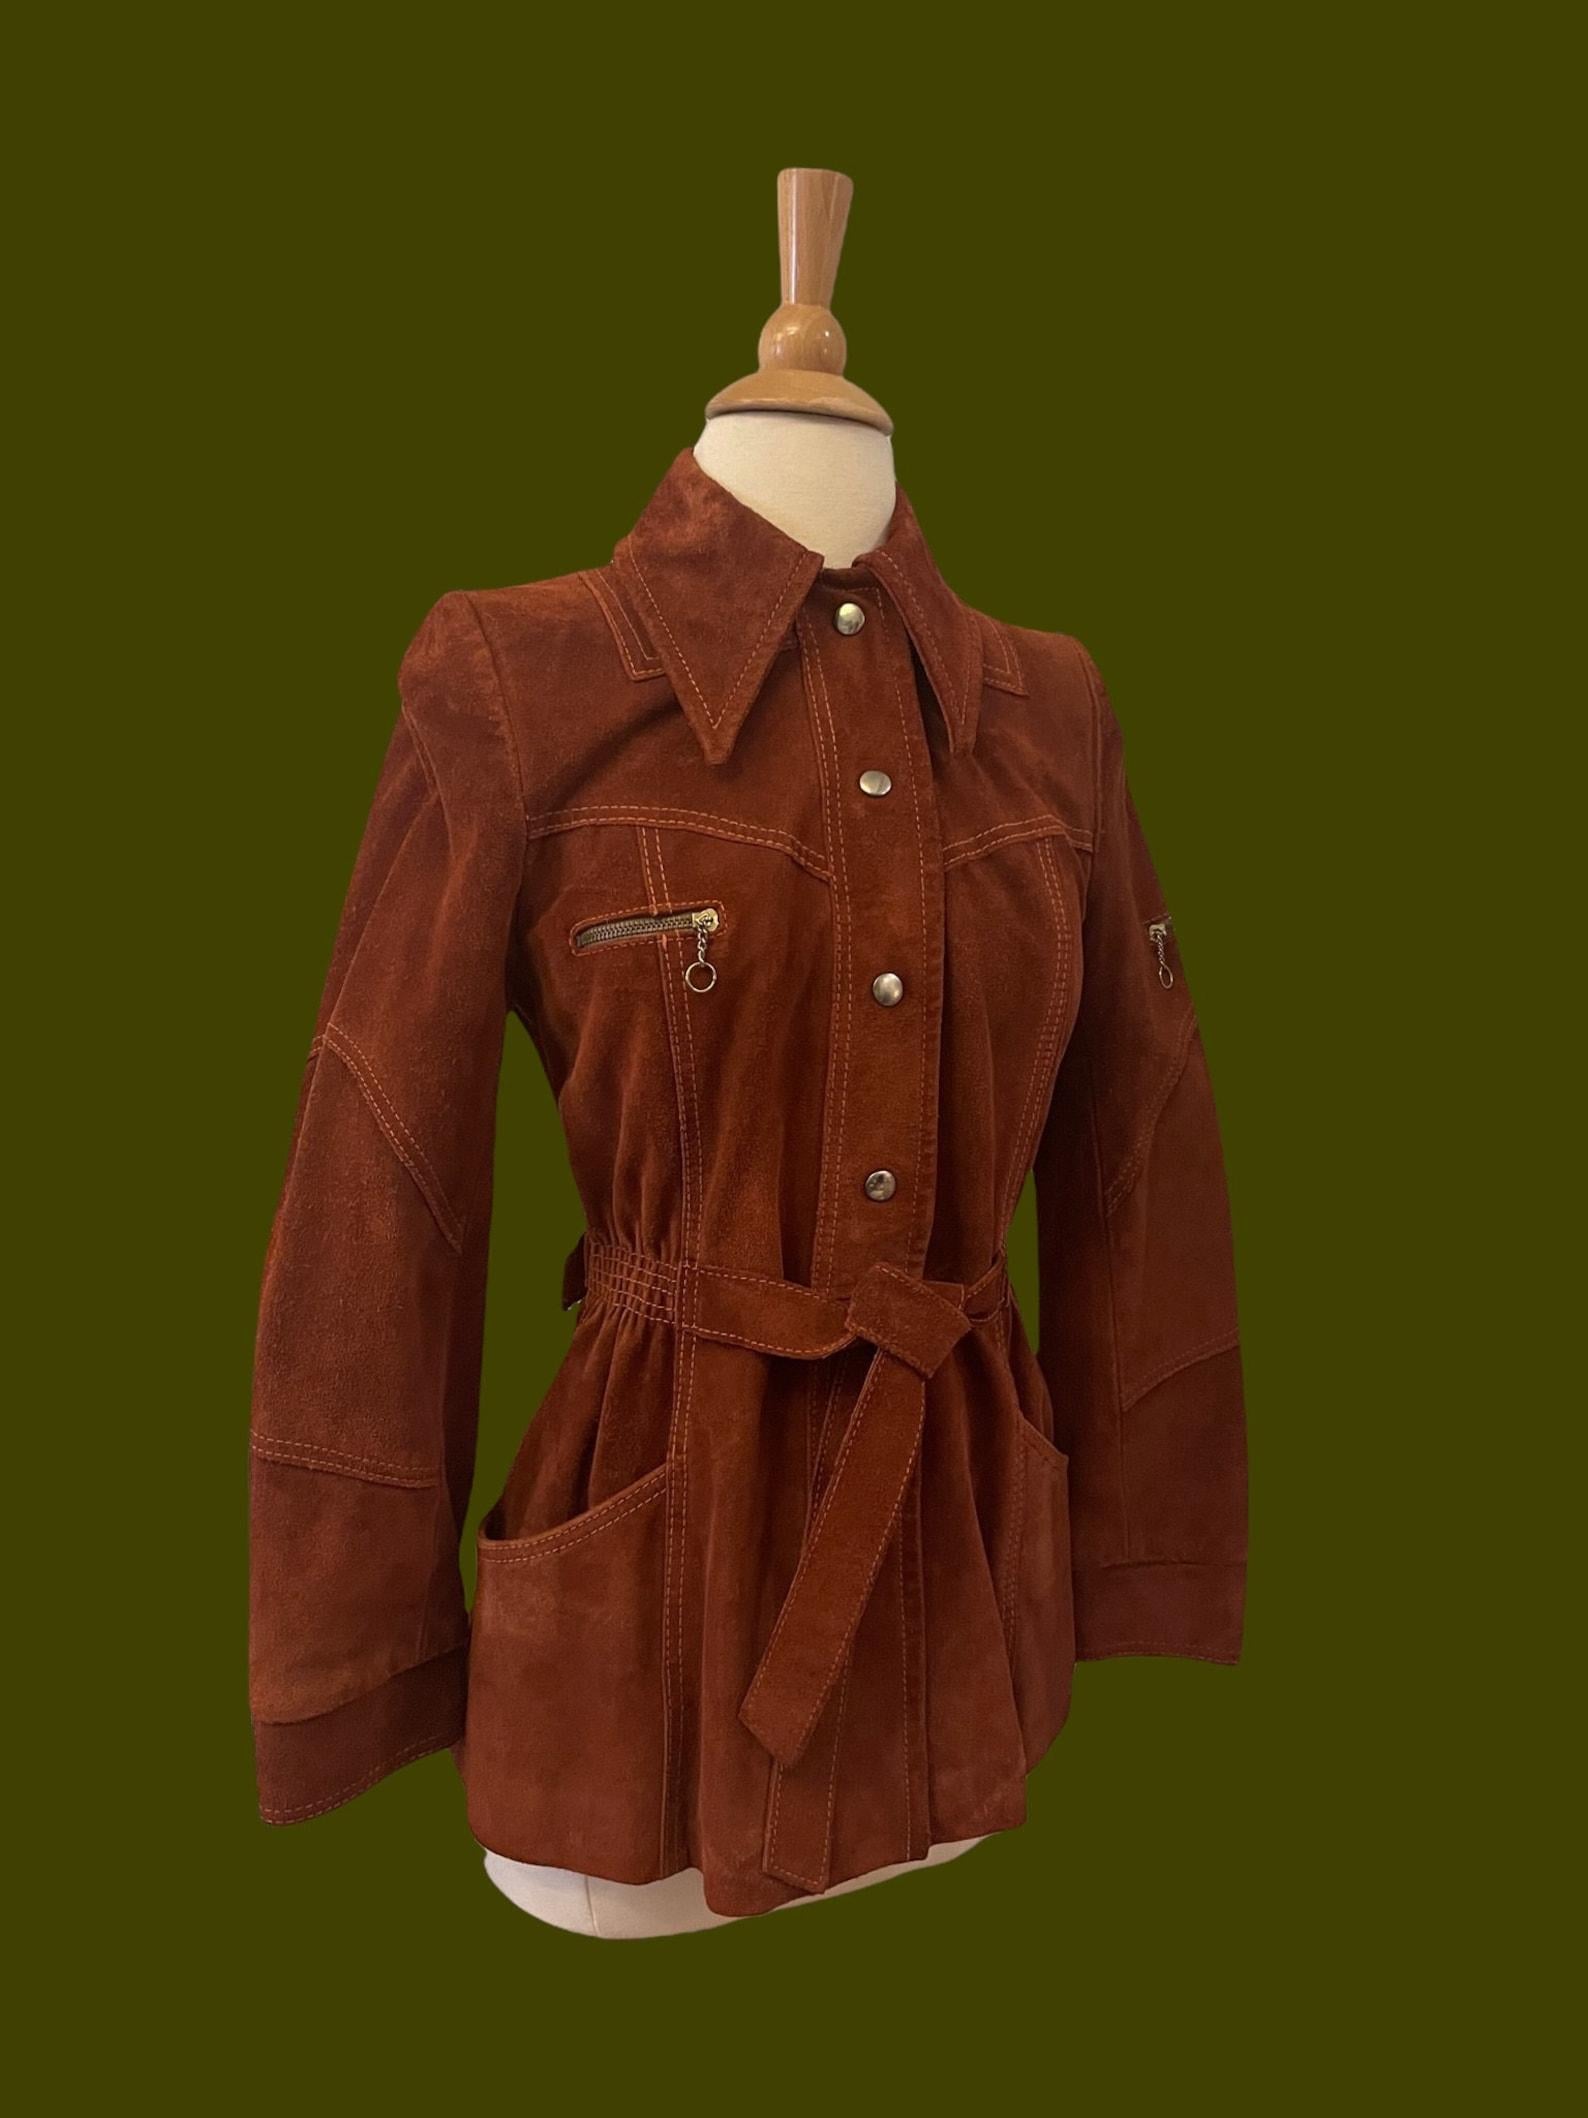 vintage rust brown suede jacket
pointed collar
cinched waist with attached belt
small coin pockets on the chest & sleeve
coin pockets have pull ring zip closure
bucket pockets at waist
snap button closure
topstitching throughout
jacket is